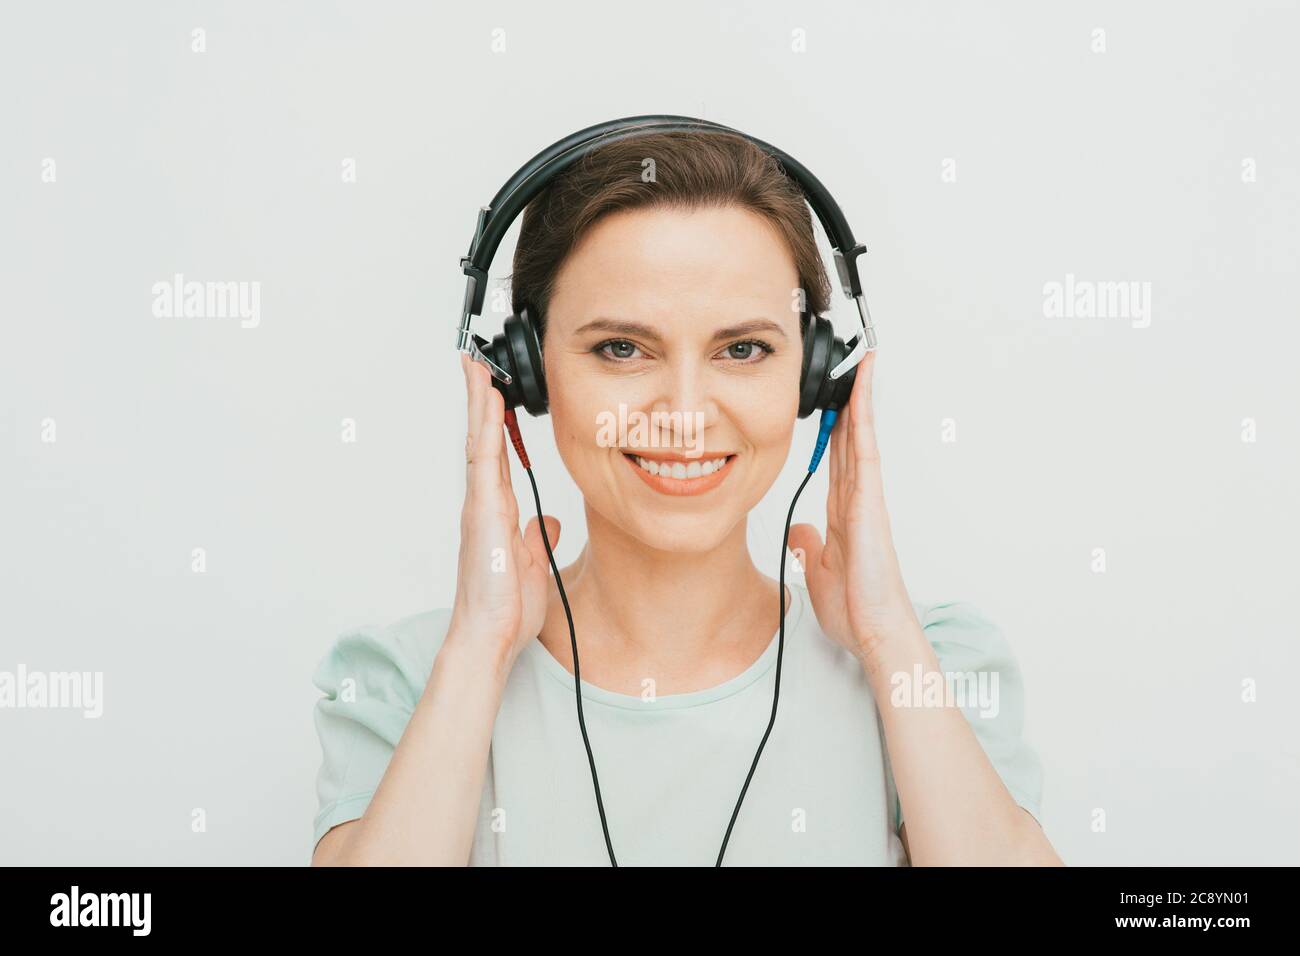 Hearing test, hearing diagnostic. A woman wearing headphones having an  audiometry test isolated in white Stock Photo - Alamy